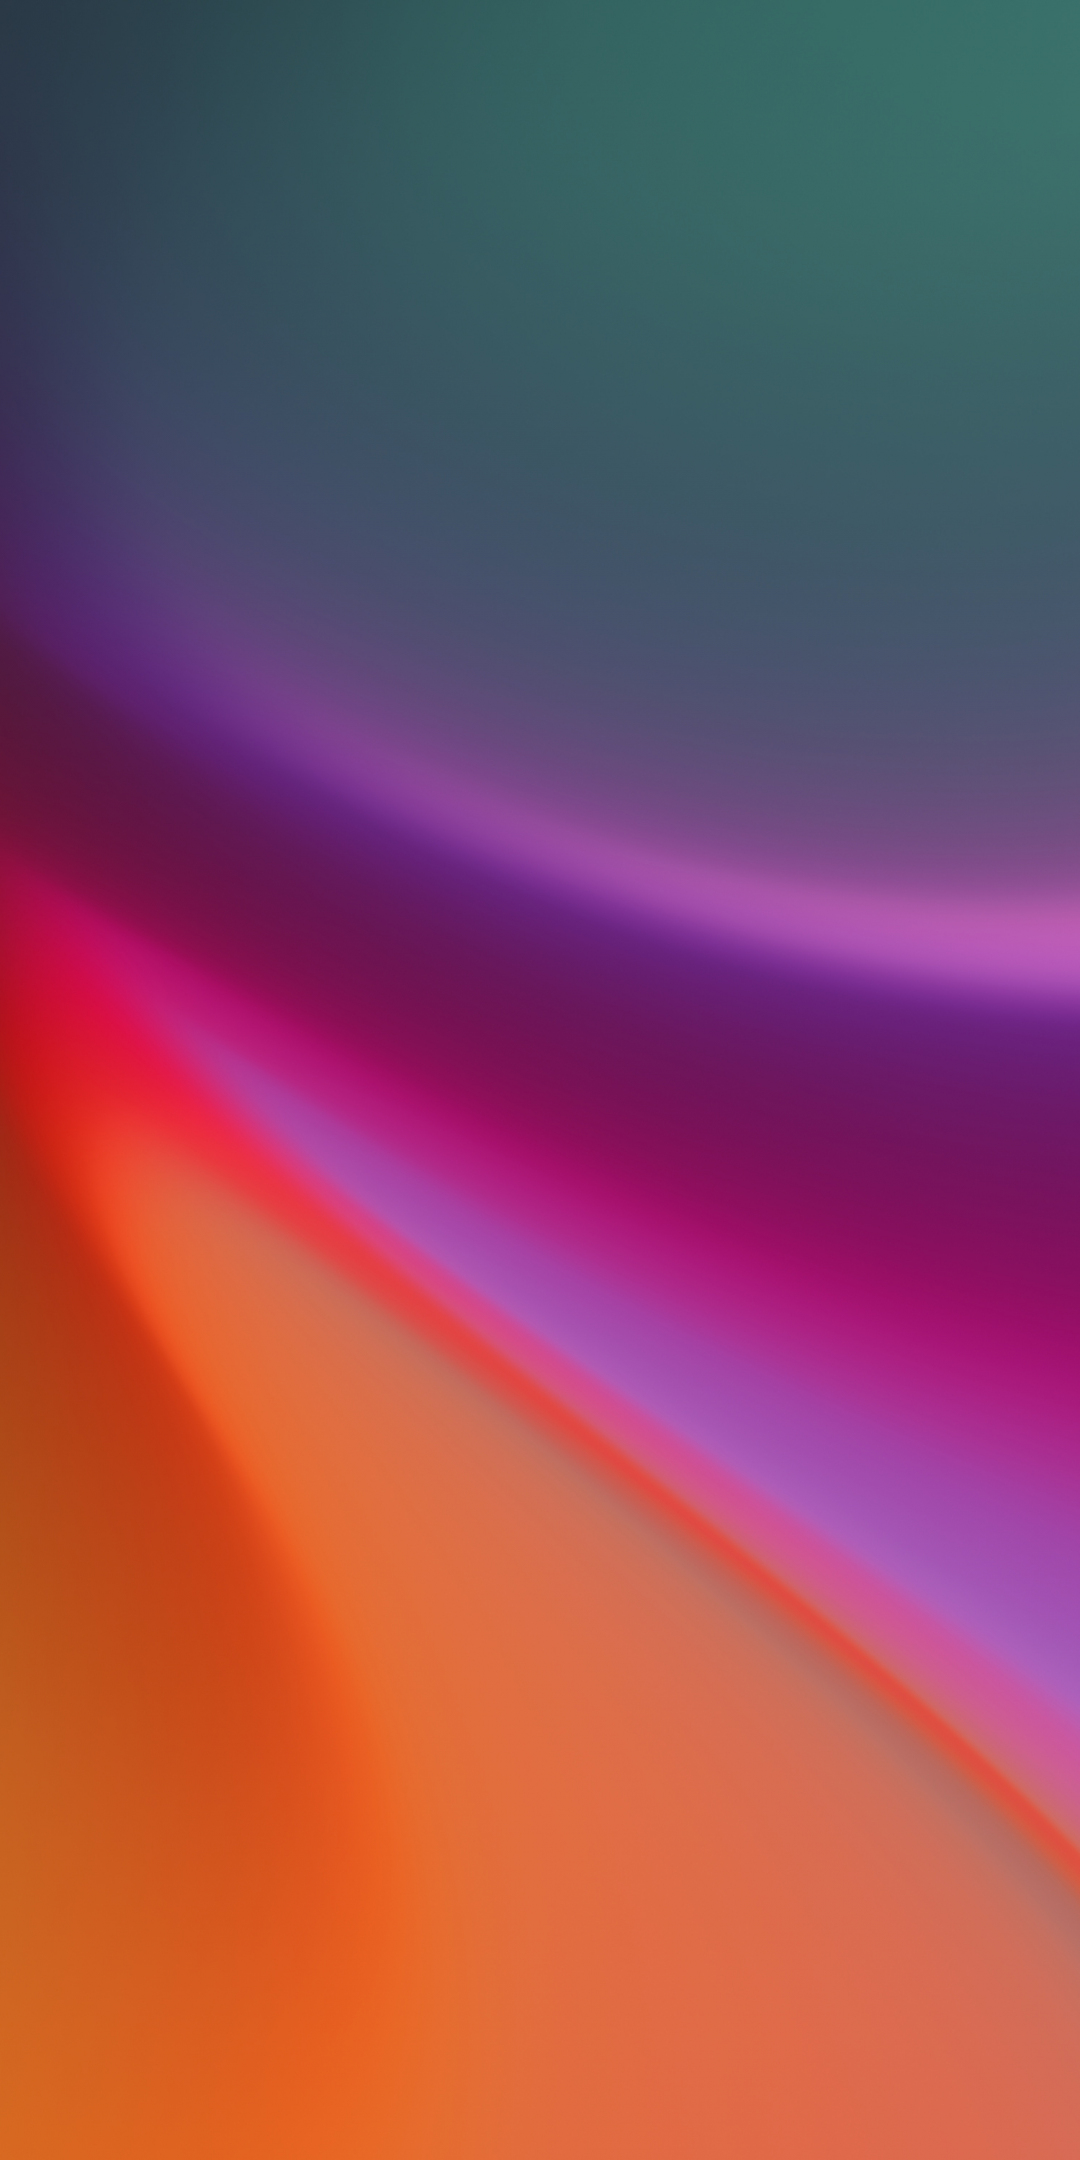 Abstract, gradients, colorful, creamy, vivid and vibrant, 1080x2160 wallpaper